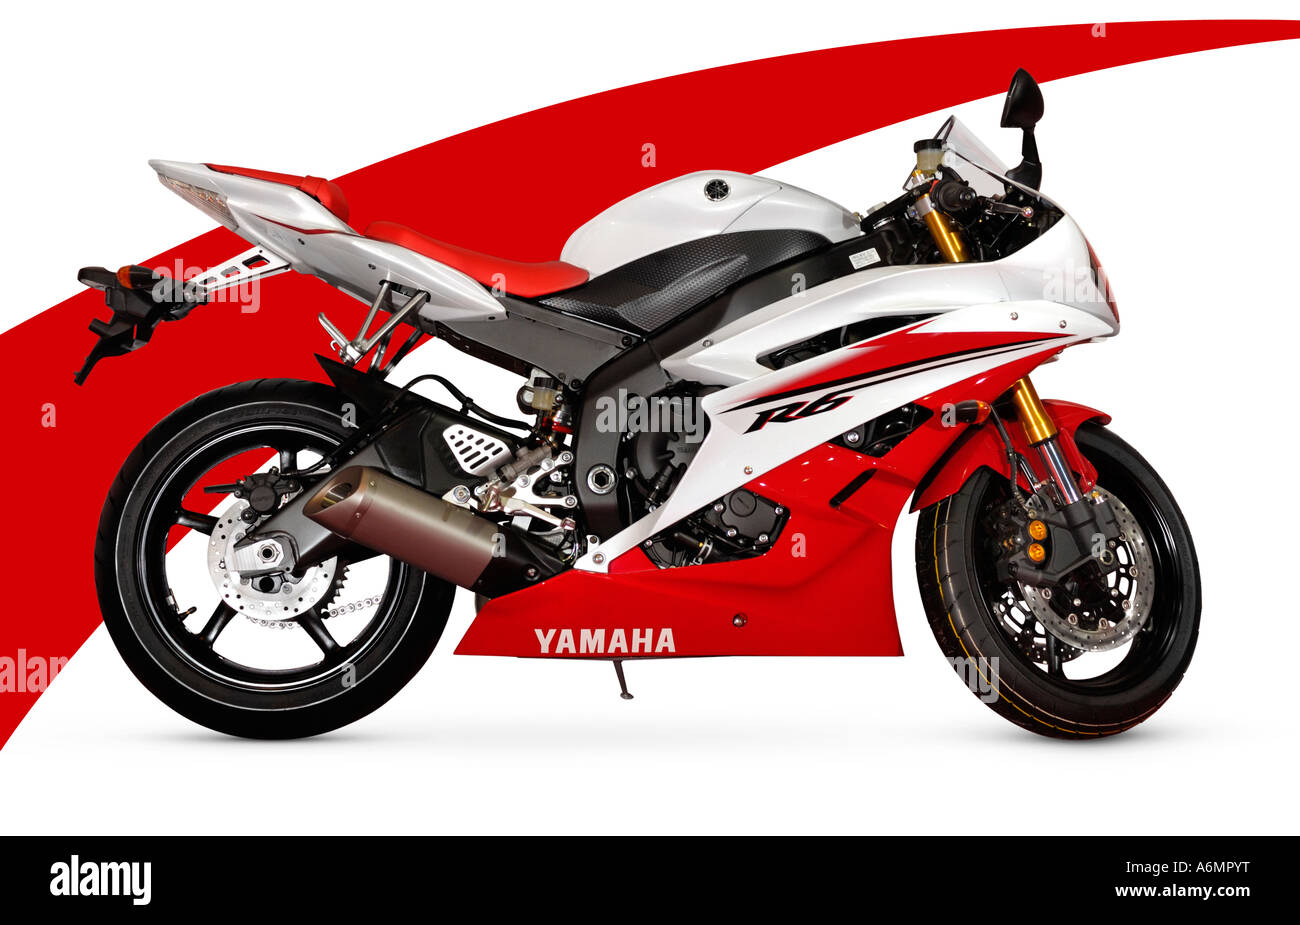 https://c8.alamy.com/comp/A6MPYT/middleweight-supersport-bike-yamaha-yzf-r6-2006-red-white-racing-motorcycle-A6MPYT.jpg